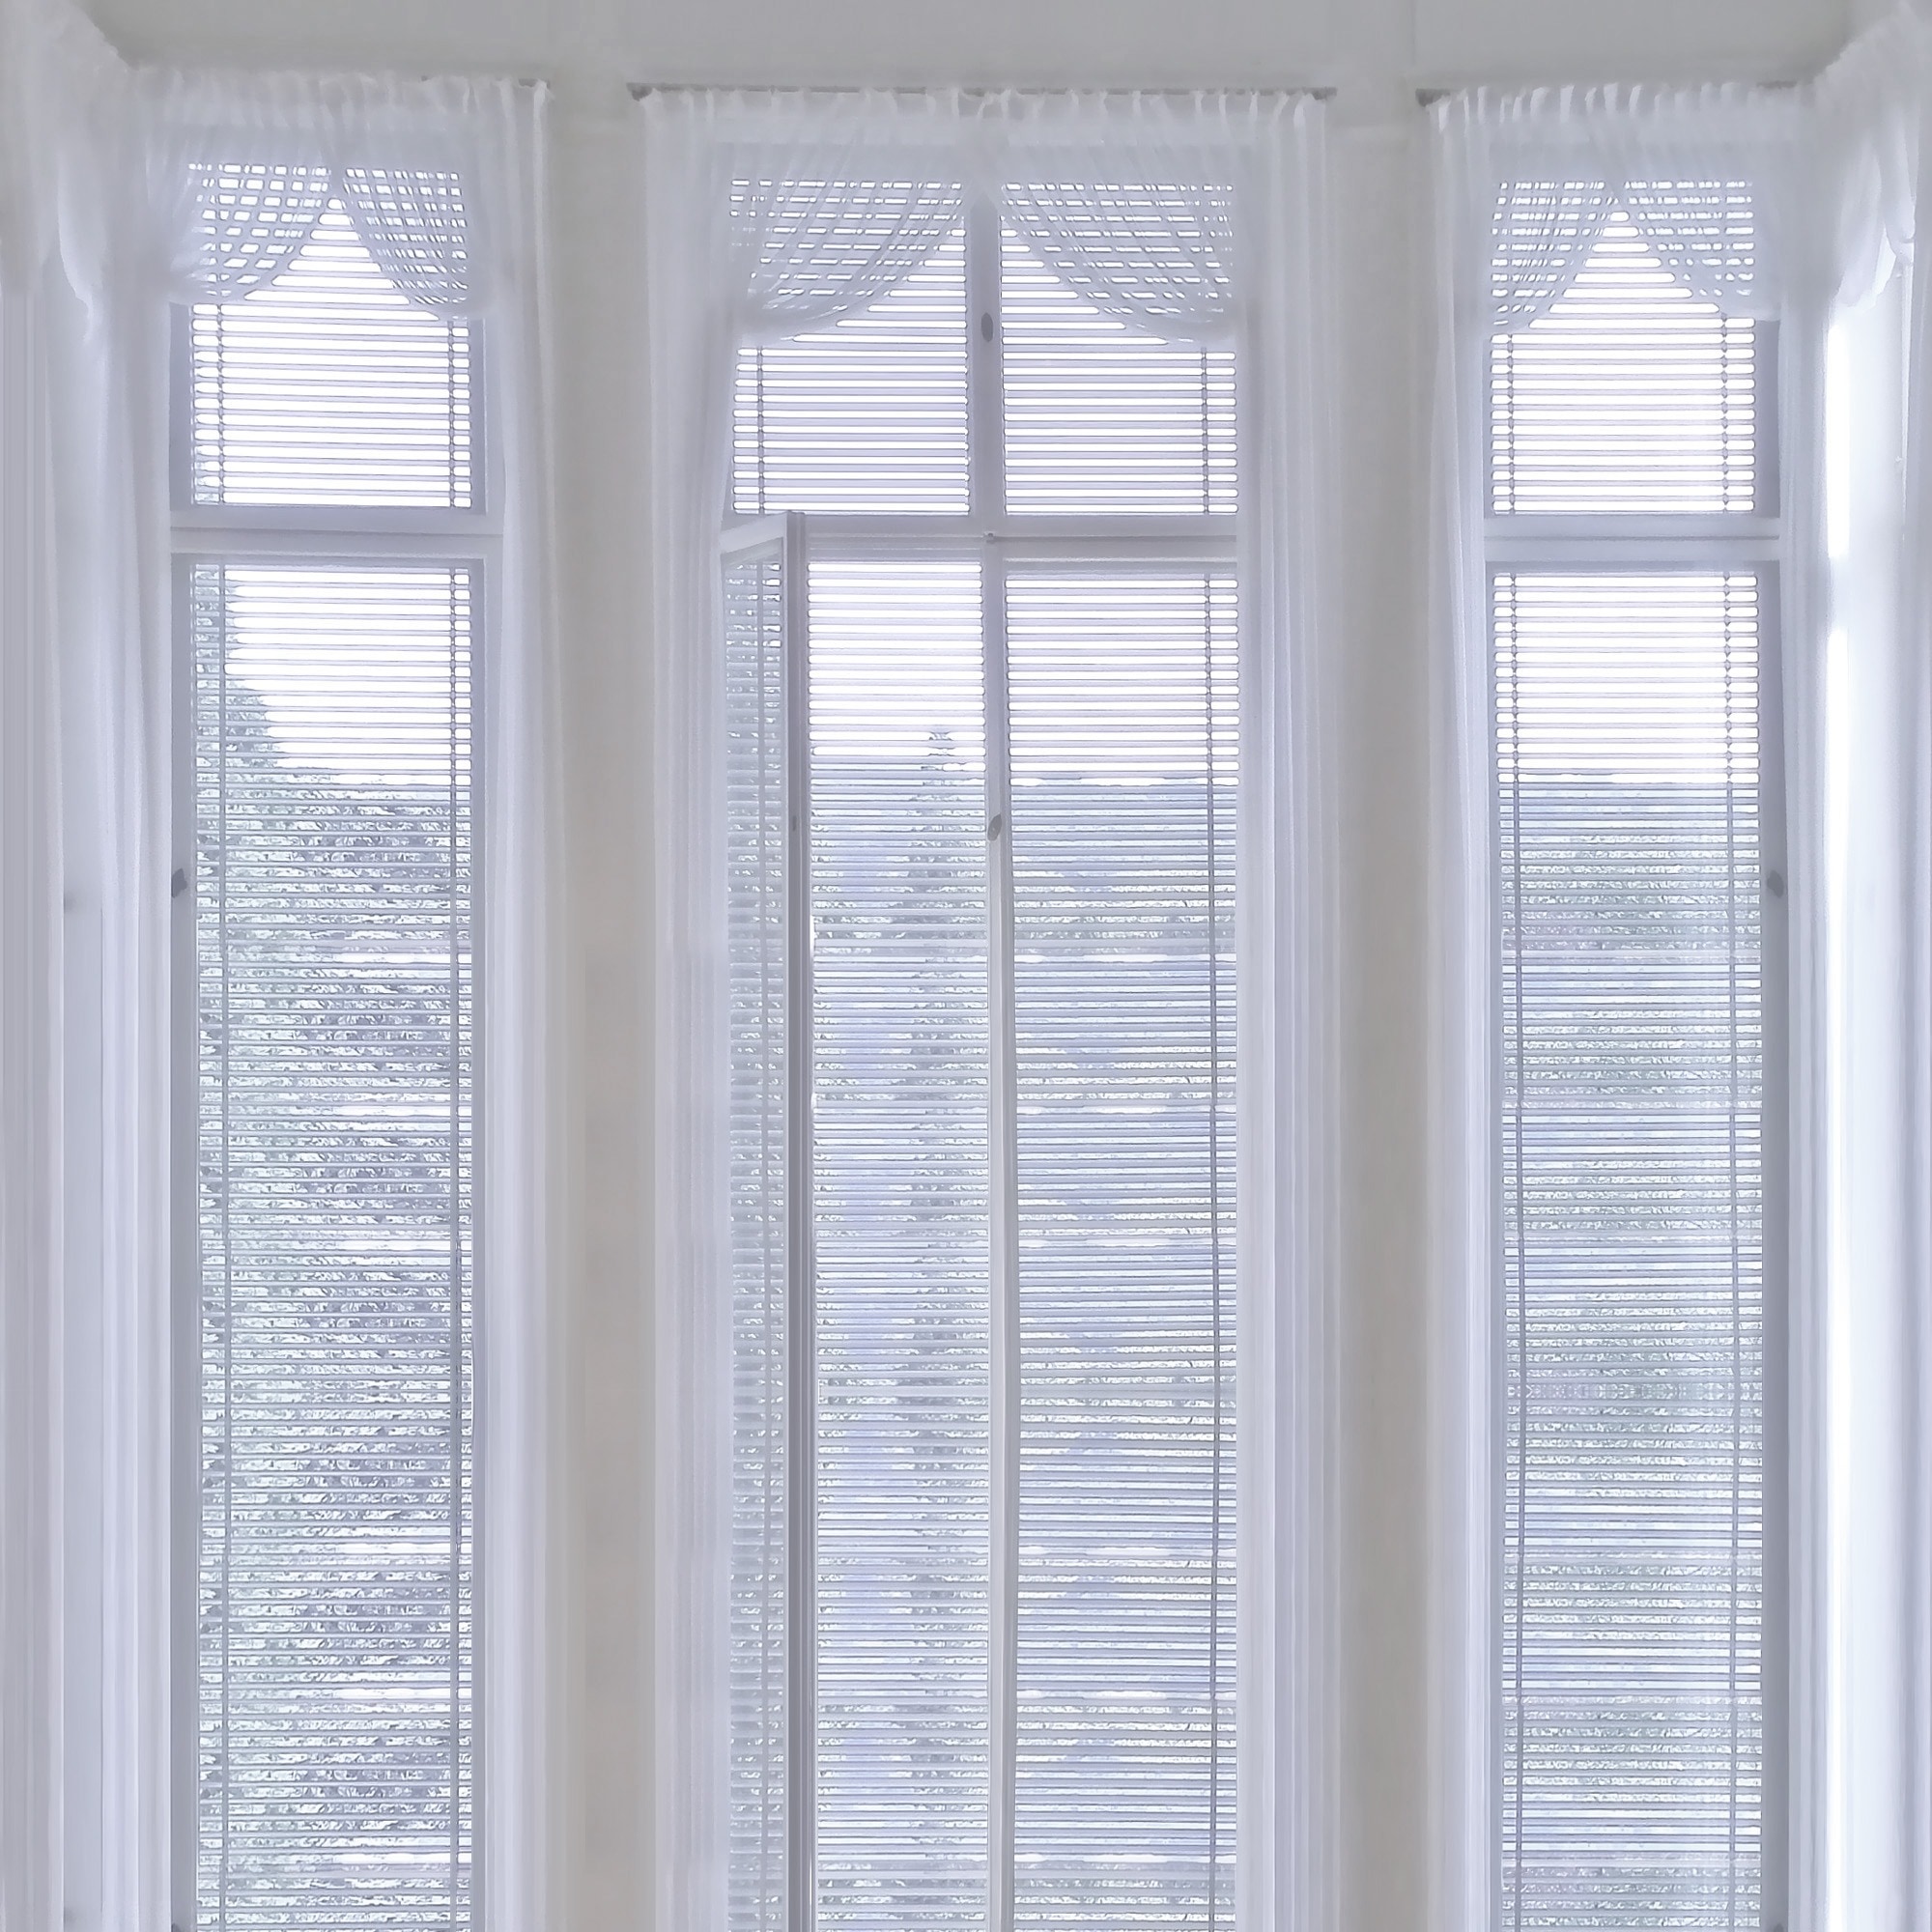 white windows blinds and mesh curtains